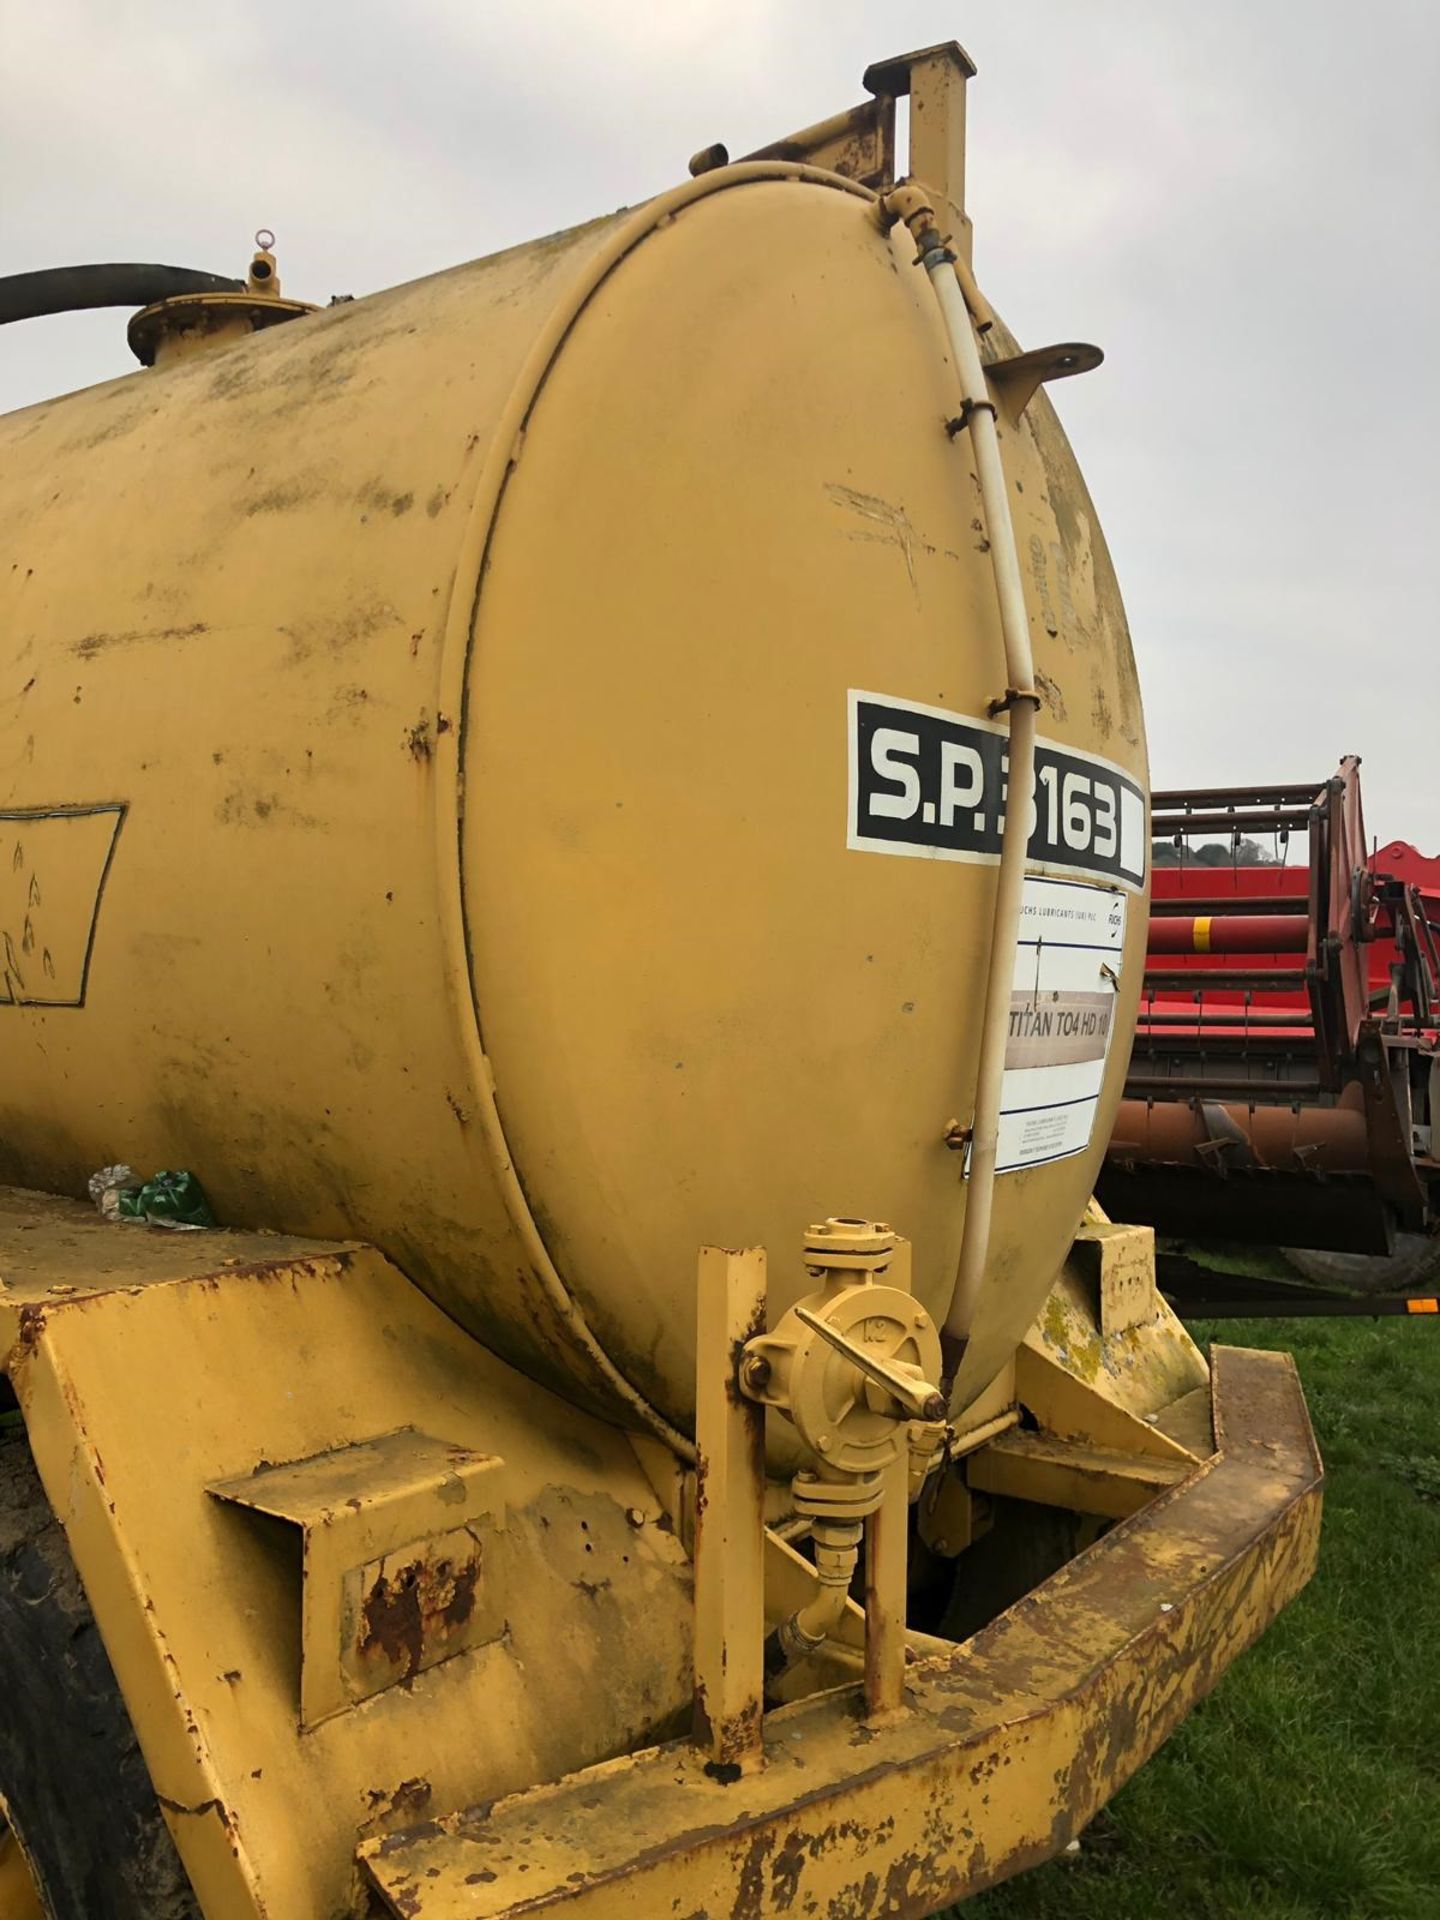 1989 TWIN AXLE TOW ABLE YELLOW OIL TANK, SERIAL NUMBER: VE 355 *PLUS VAT* - Image 4 of 10